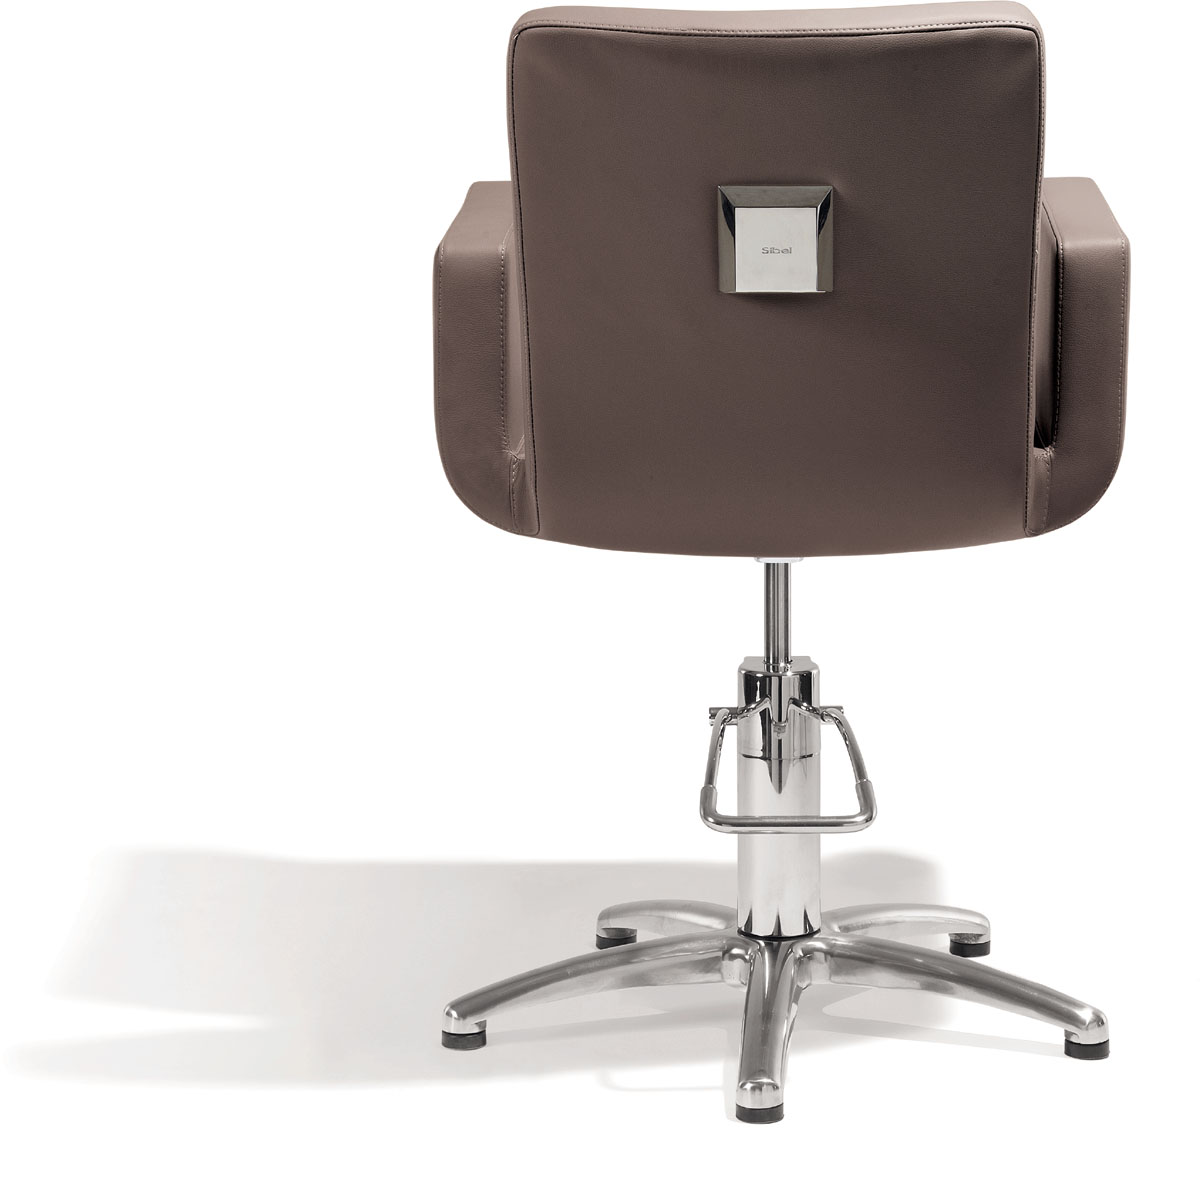  Sibel Attractio Styling Chair Brown / 5-Star-Base 